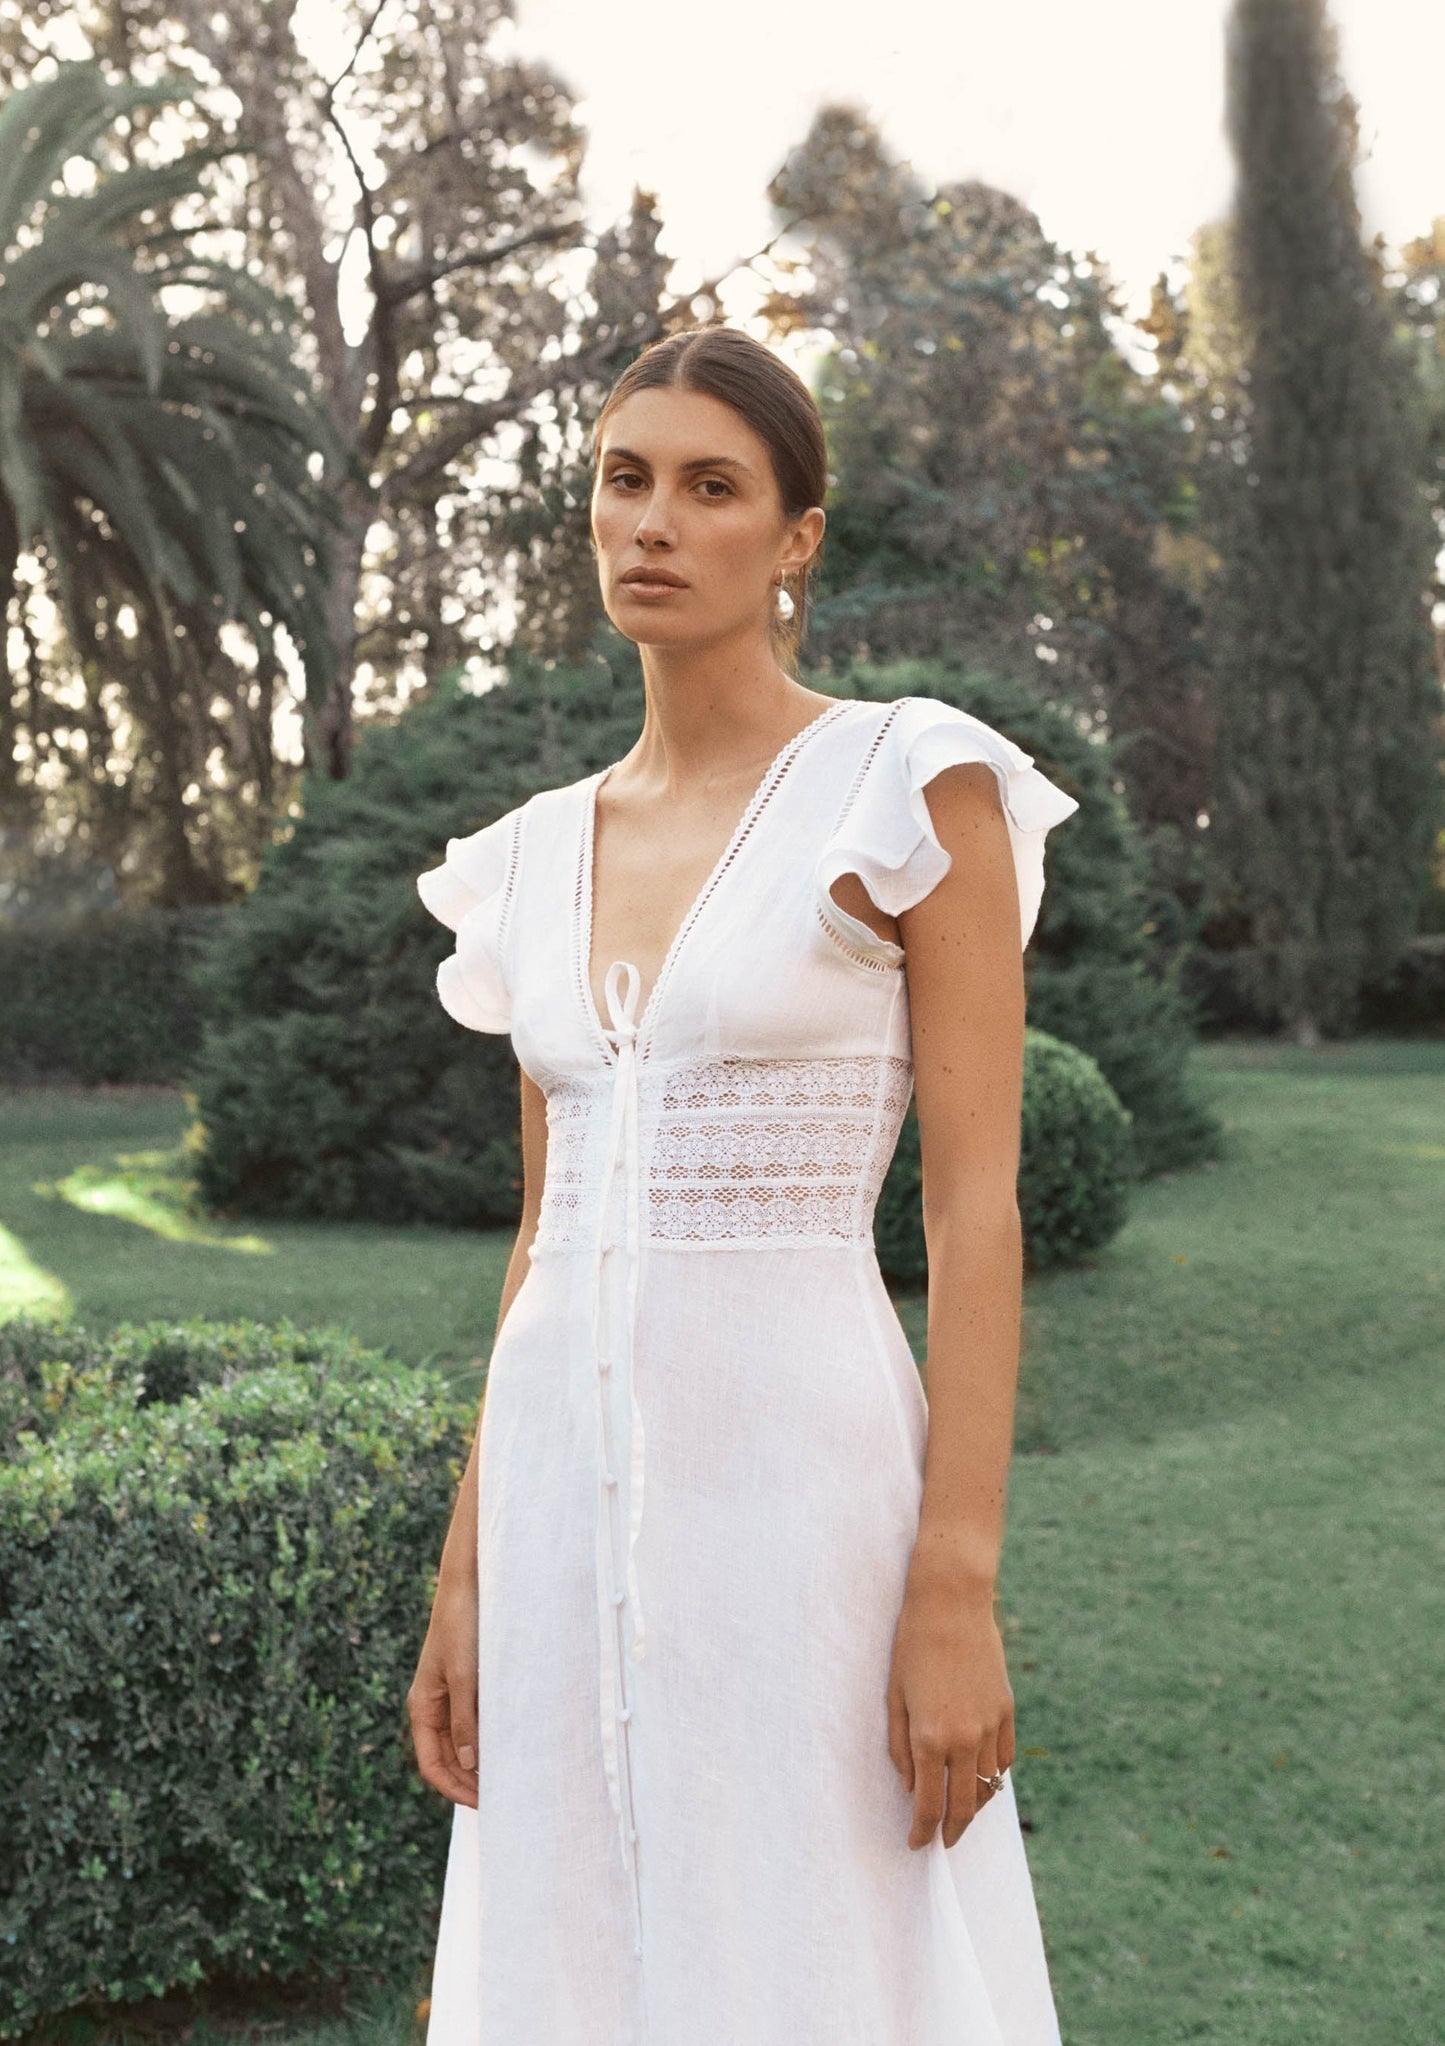 This dreamy dress is perfect for brides-to-be and summer events alike. With delicate lace inserts and trims, ruffled sleeves, and a romantic, versatile white hue, the Basel is your hero white dress. 